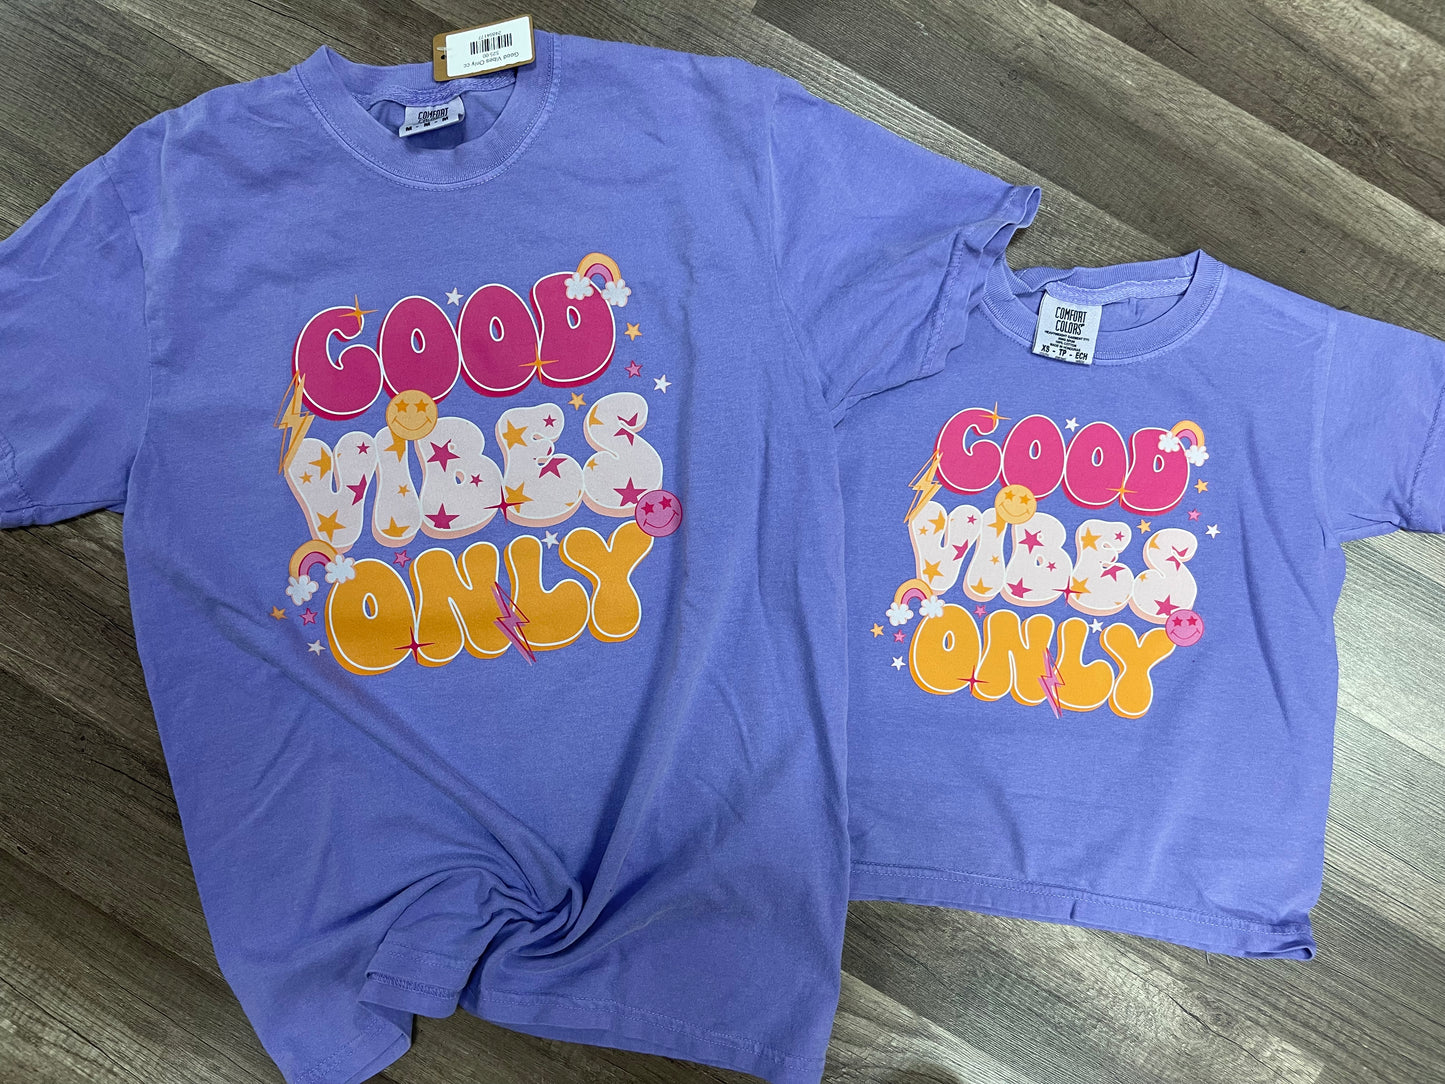 Good vibes only cc tee